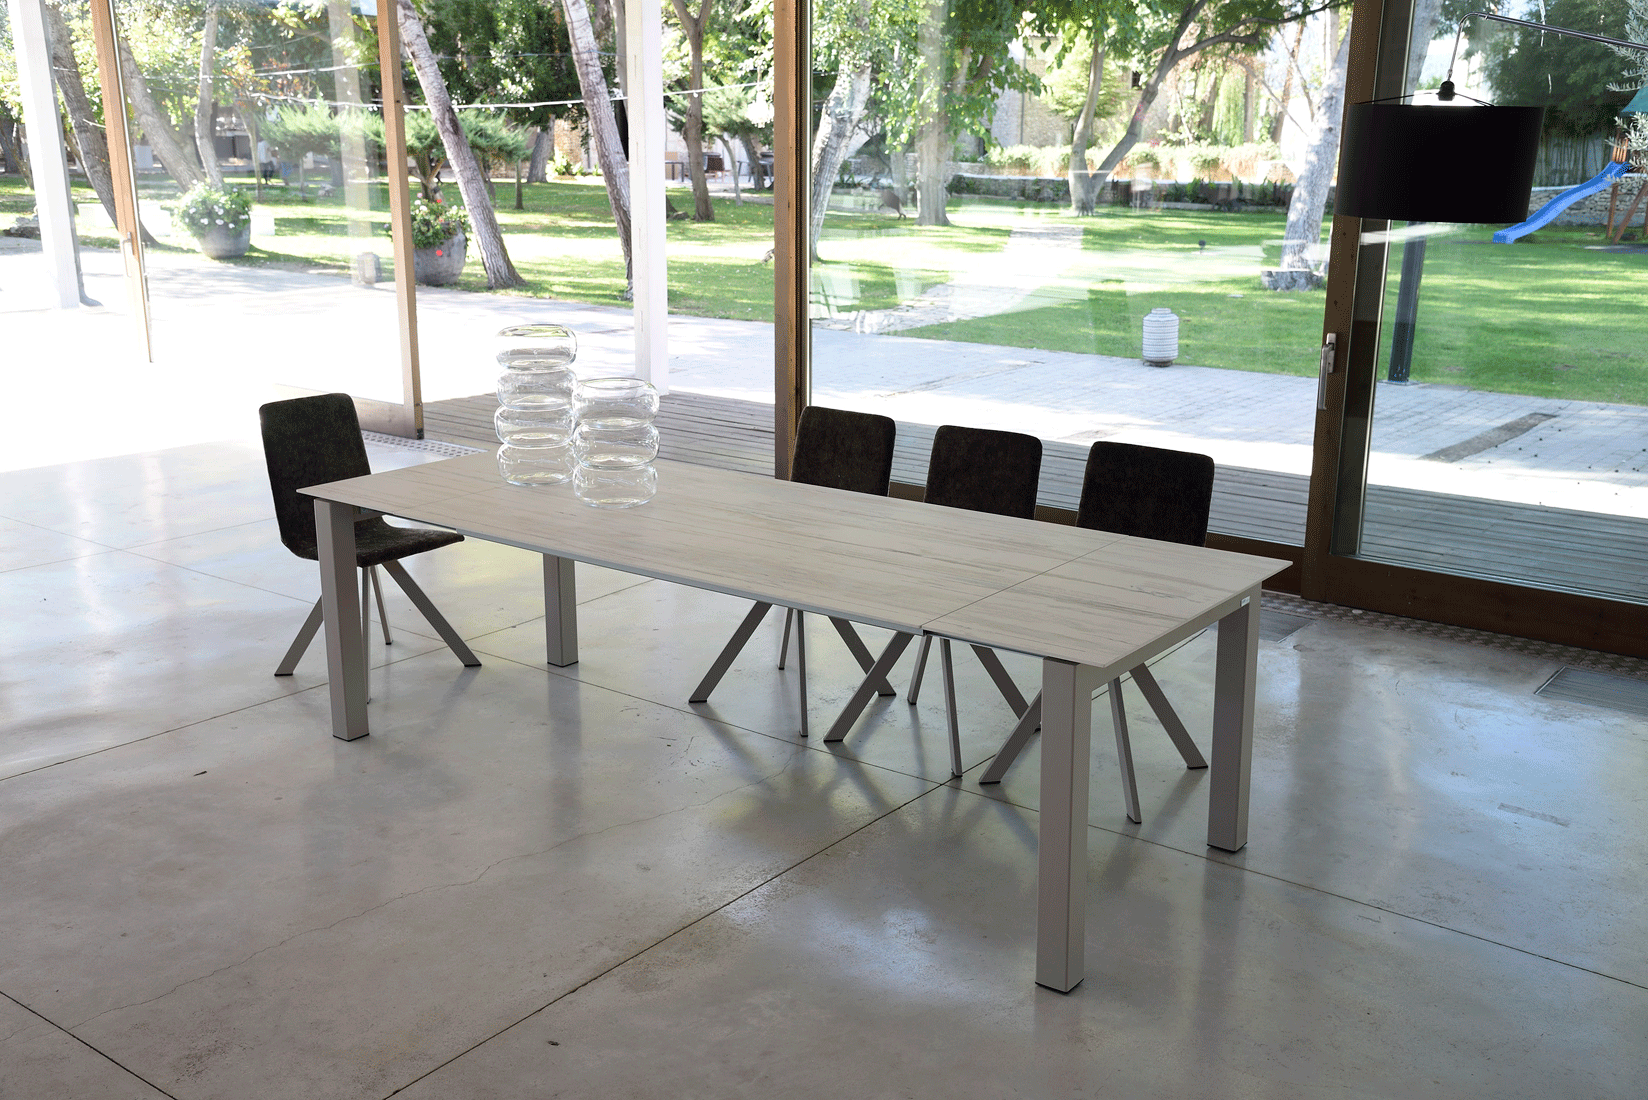 Brands Garcia Laurel & Hardy Tables Chamon Table + Kiss Chairs